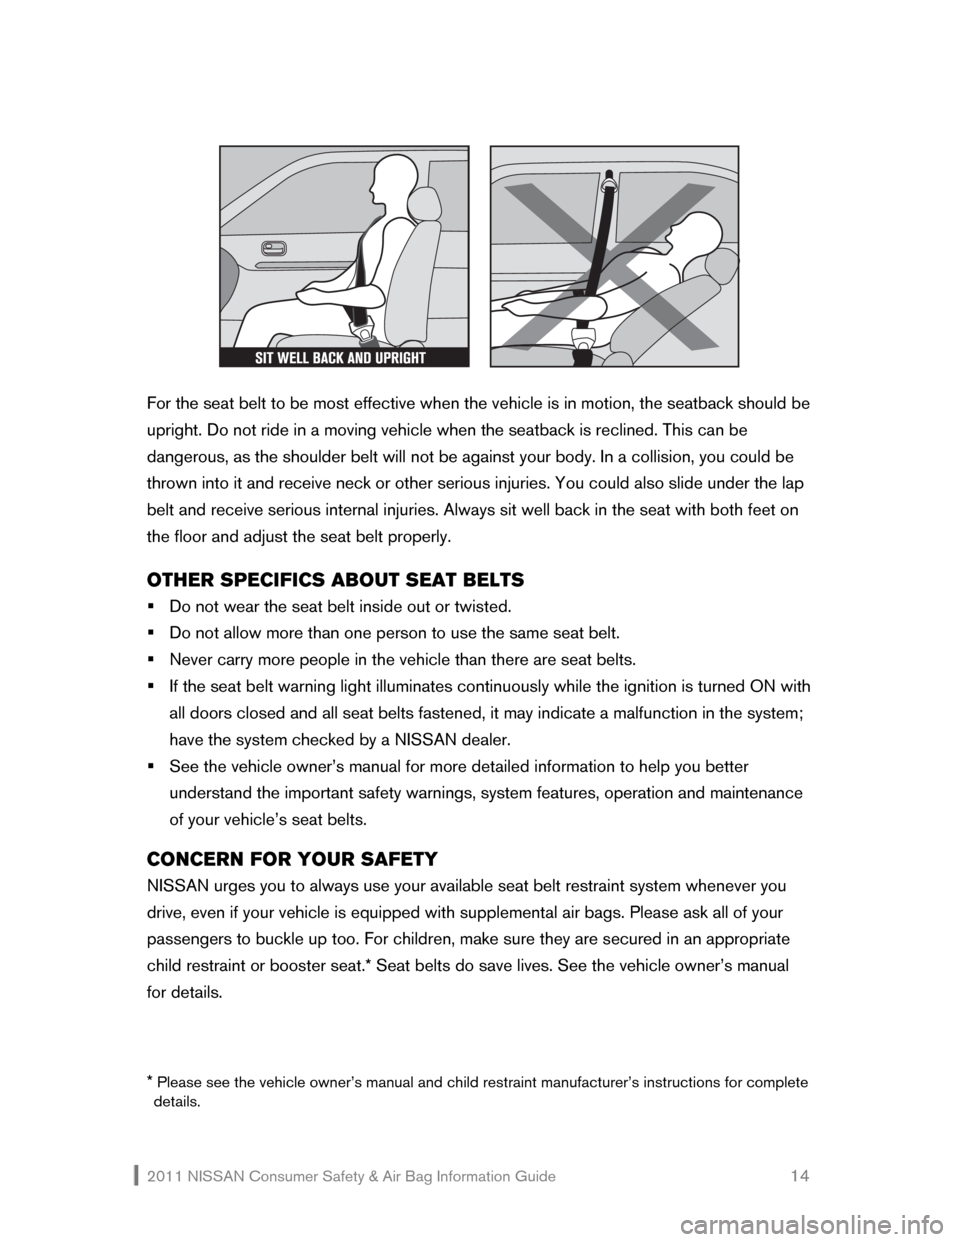 NISSAN XTERRA 2011 N50 / 2.G Consumer Safety Air Bag Information Guide 2011 NISSAN Consumer Safety & Air Bag Information Guide                                                       14 
 
 
 
For the seat belt to be most effective when the vehicle is in motion, the seatba